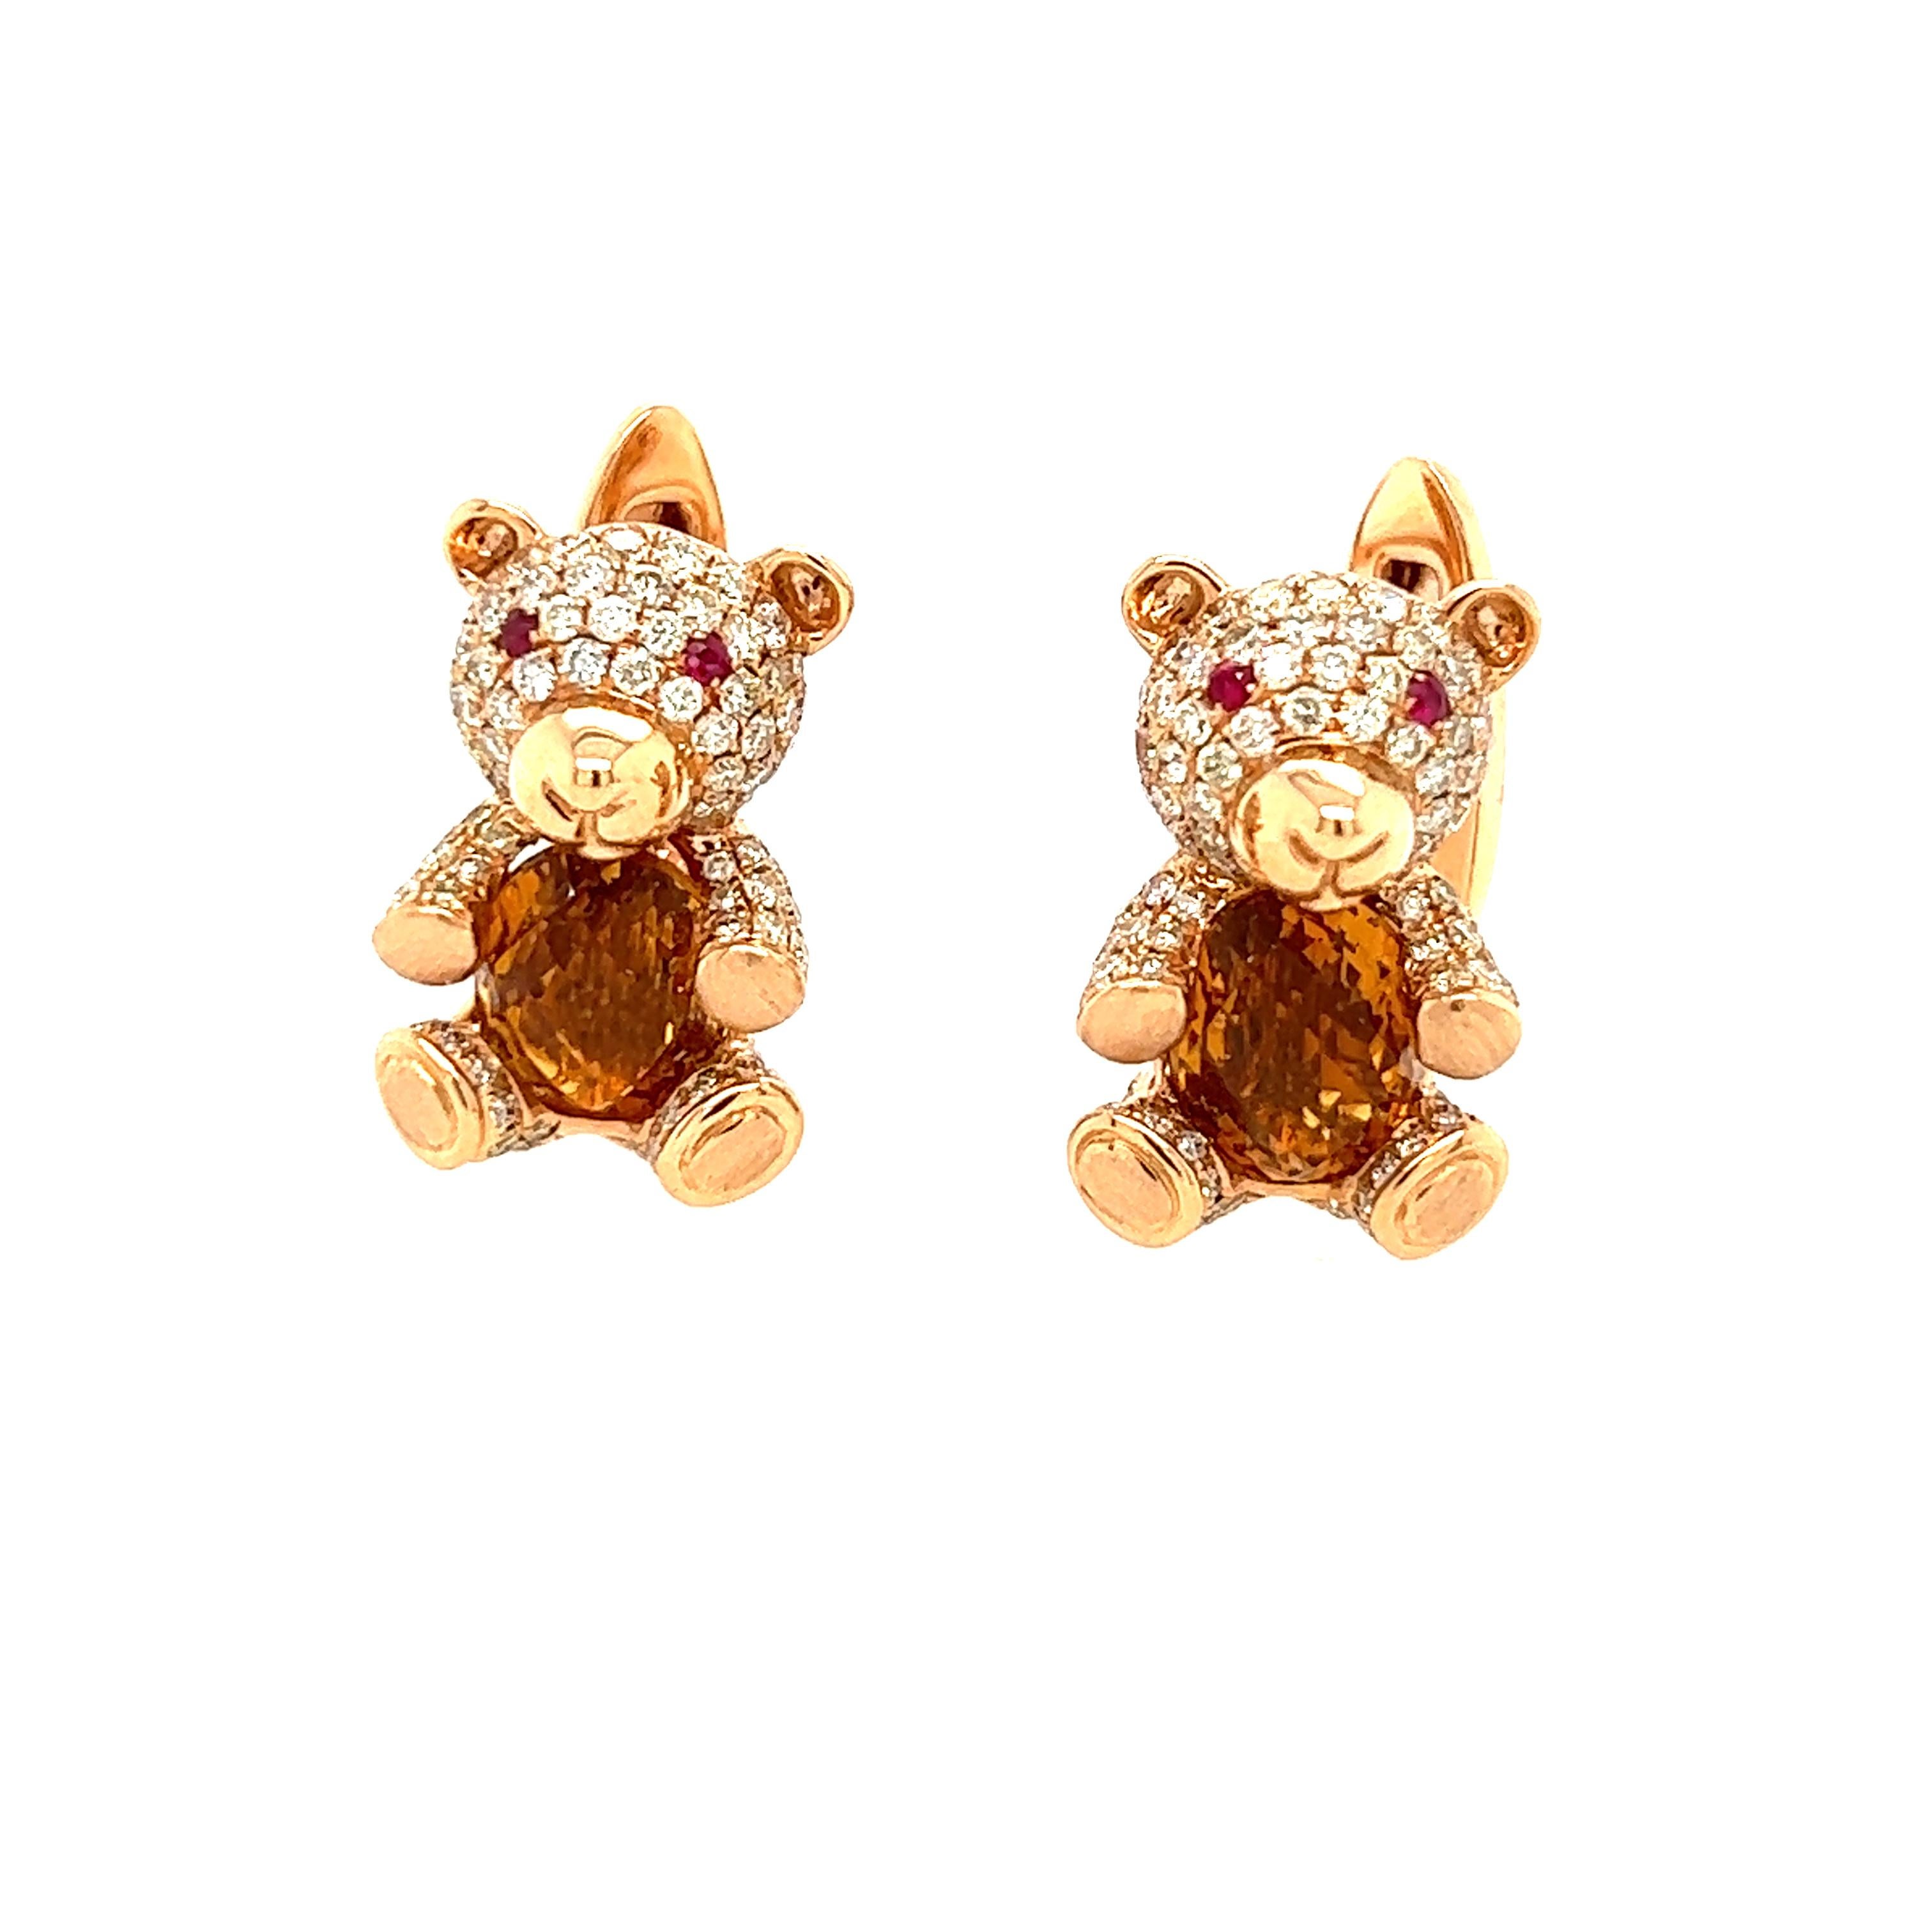 18K Gold Citrine Bear cufflinks with Diamonds and Rubies. Once piece only! 

2 CITRIN - 6.24 CT
194 DIAMONDS -  1.82 CT
4 Rubies - 0.07 CT
18K Rose Gold -  14.77 GM

CITRINE is a stone of ABUNDANCE and Wealth. In a physical sense, citrine's healing